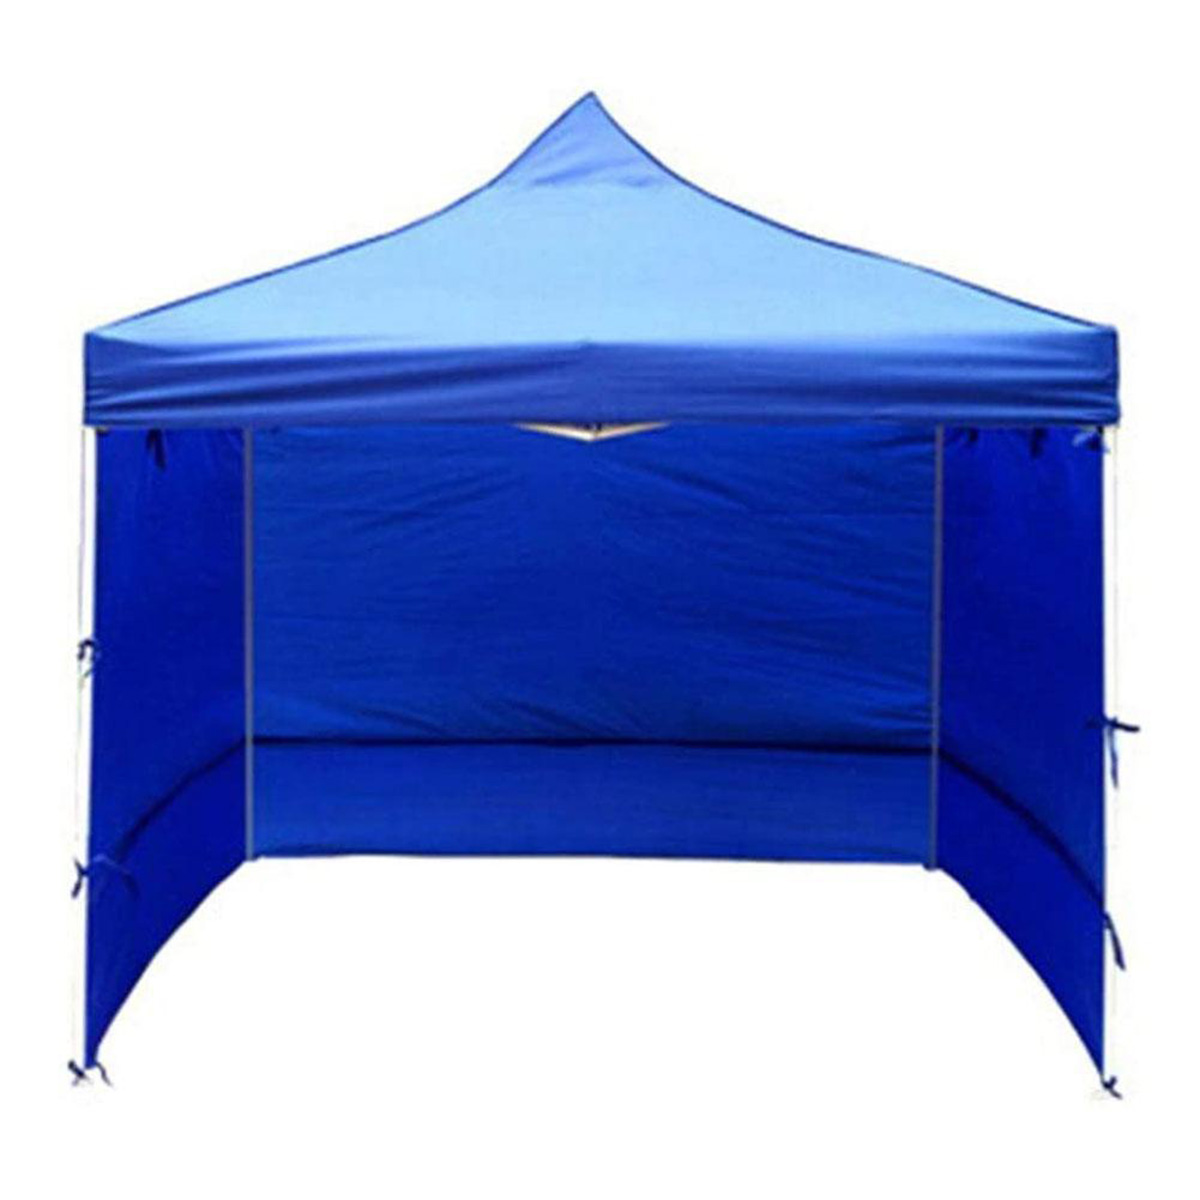 Oxford Cloth Tent Cloth Outdoor Folding Rainproof Tent Waterproof Windproof And Durable Fit For Most Gazebo Tent